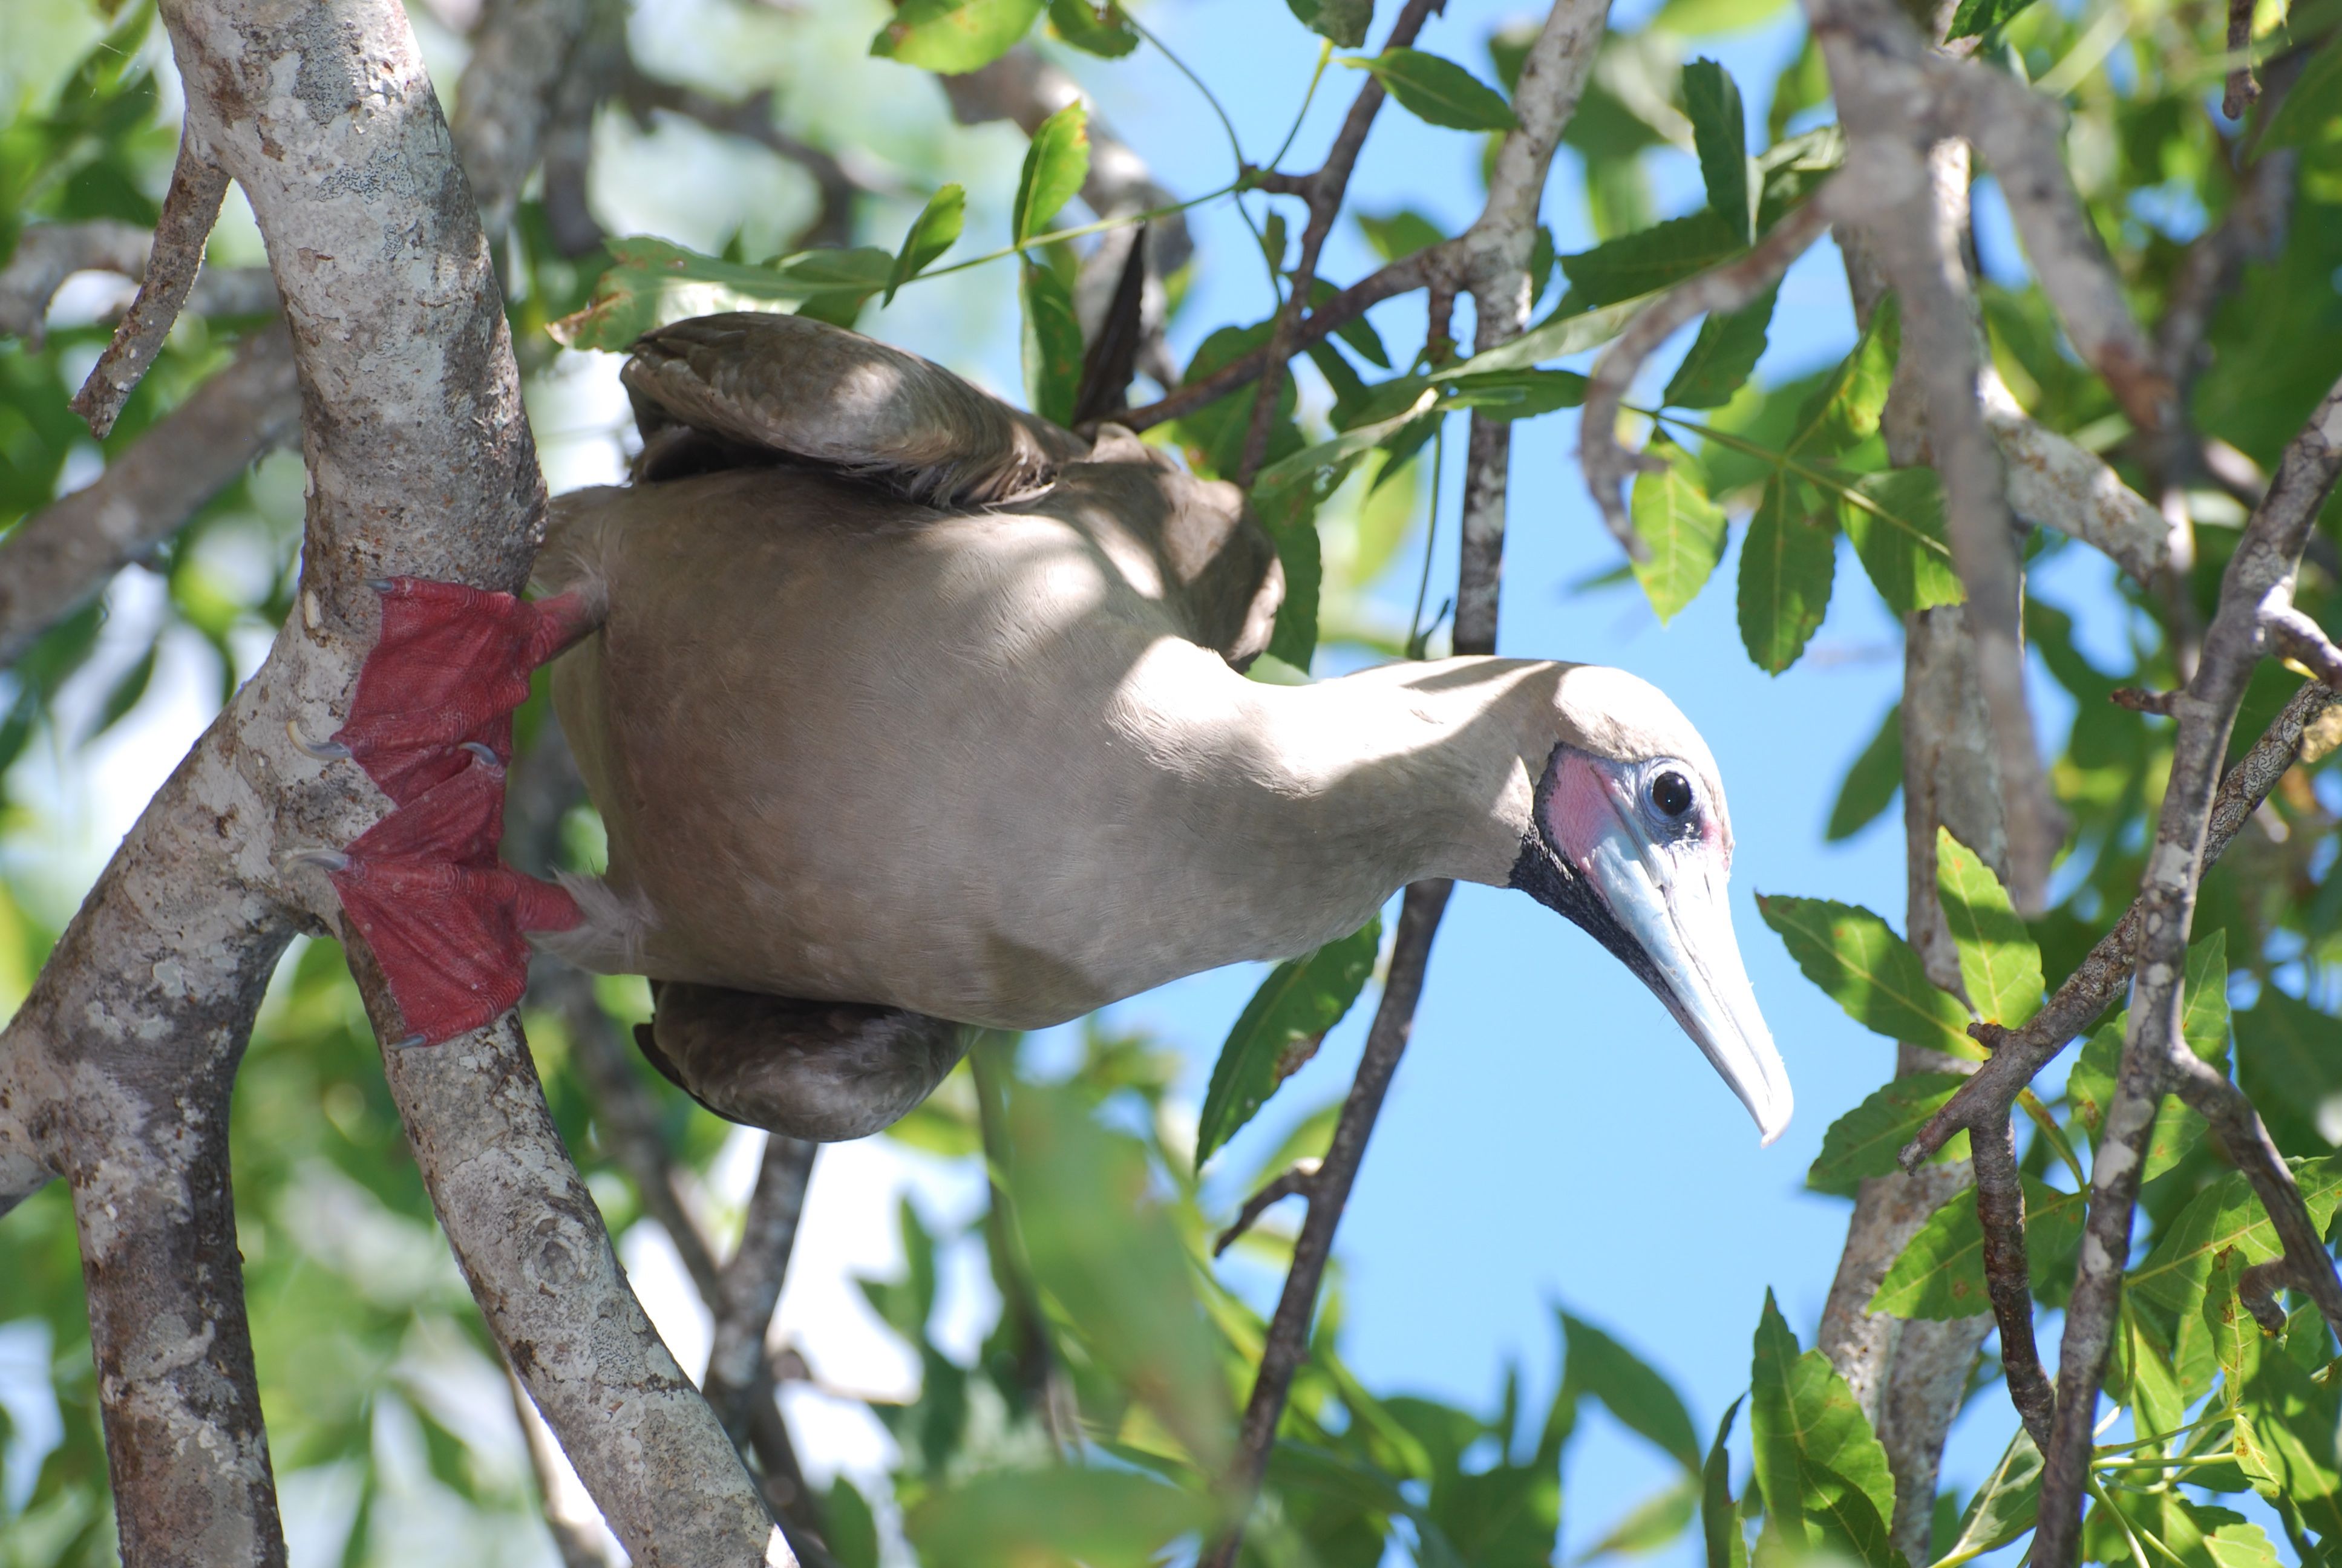 RedFooted_Booby_Genovese.jpg